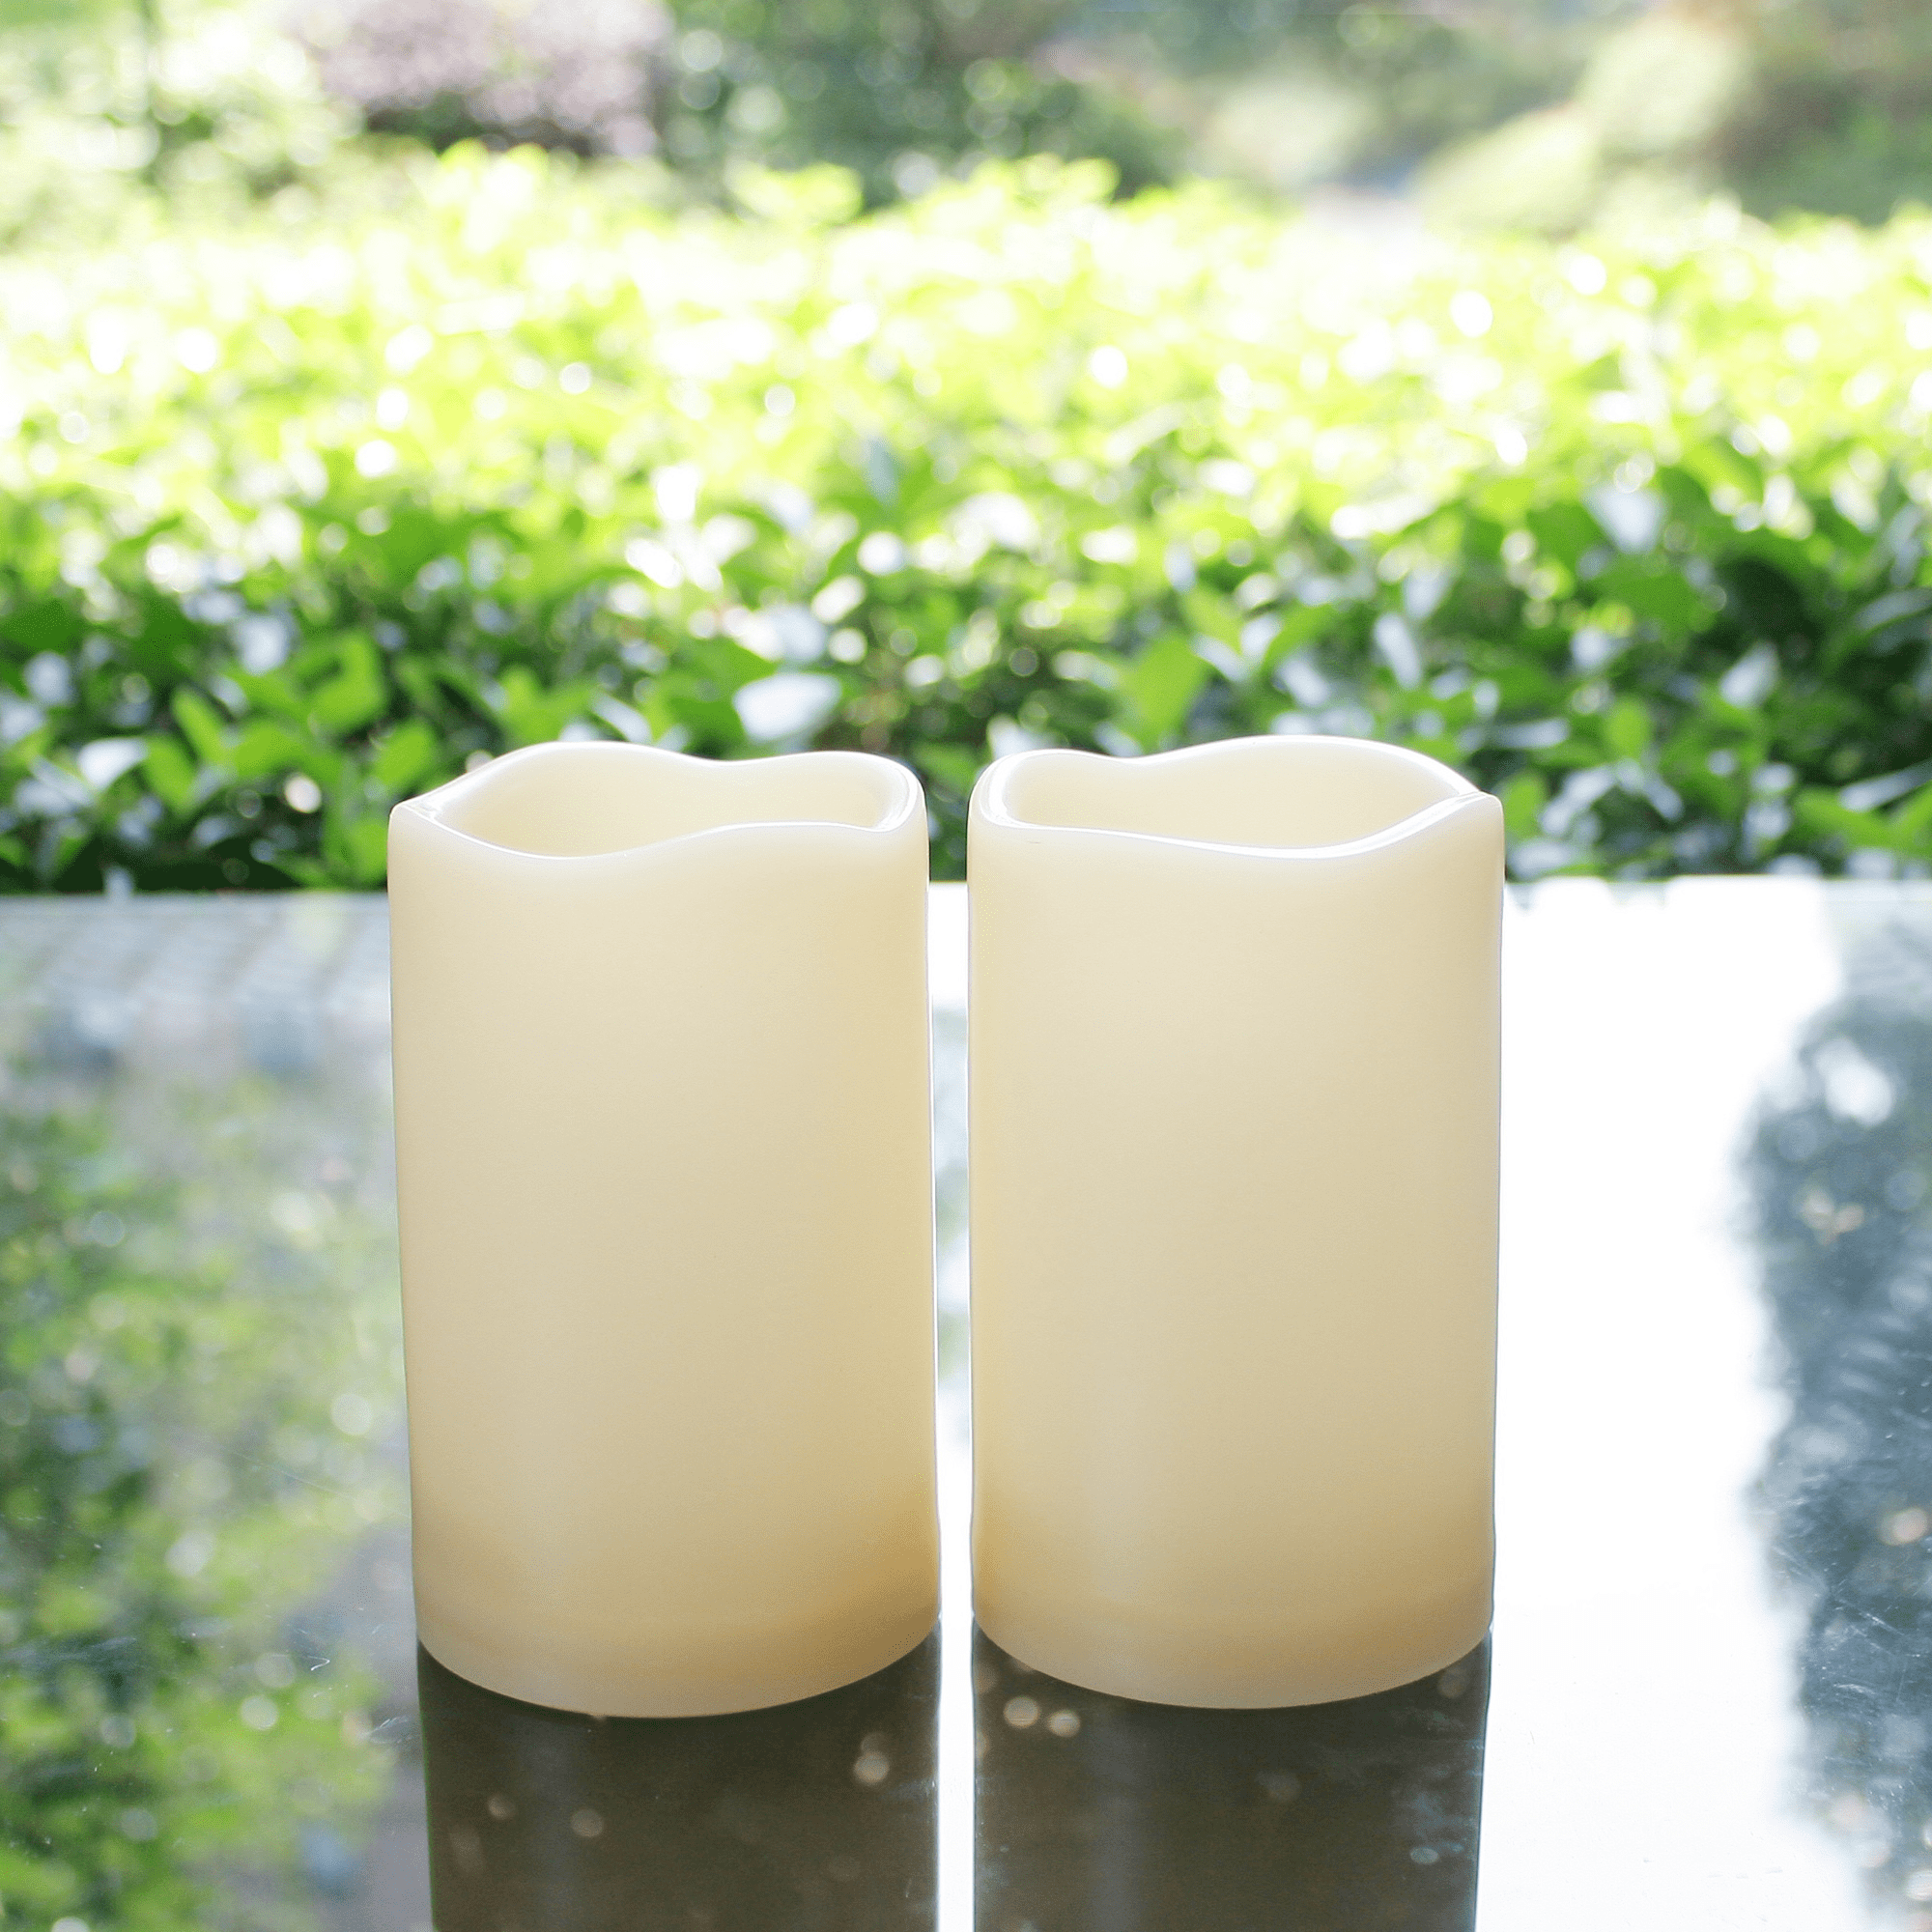 Durable LED Flameless Candle Light Battery Party Wedding Flickering Tealight 